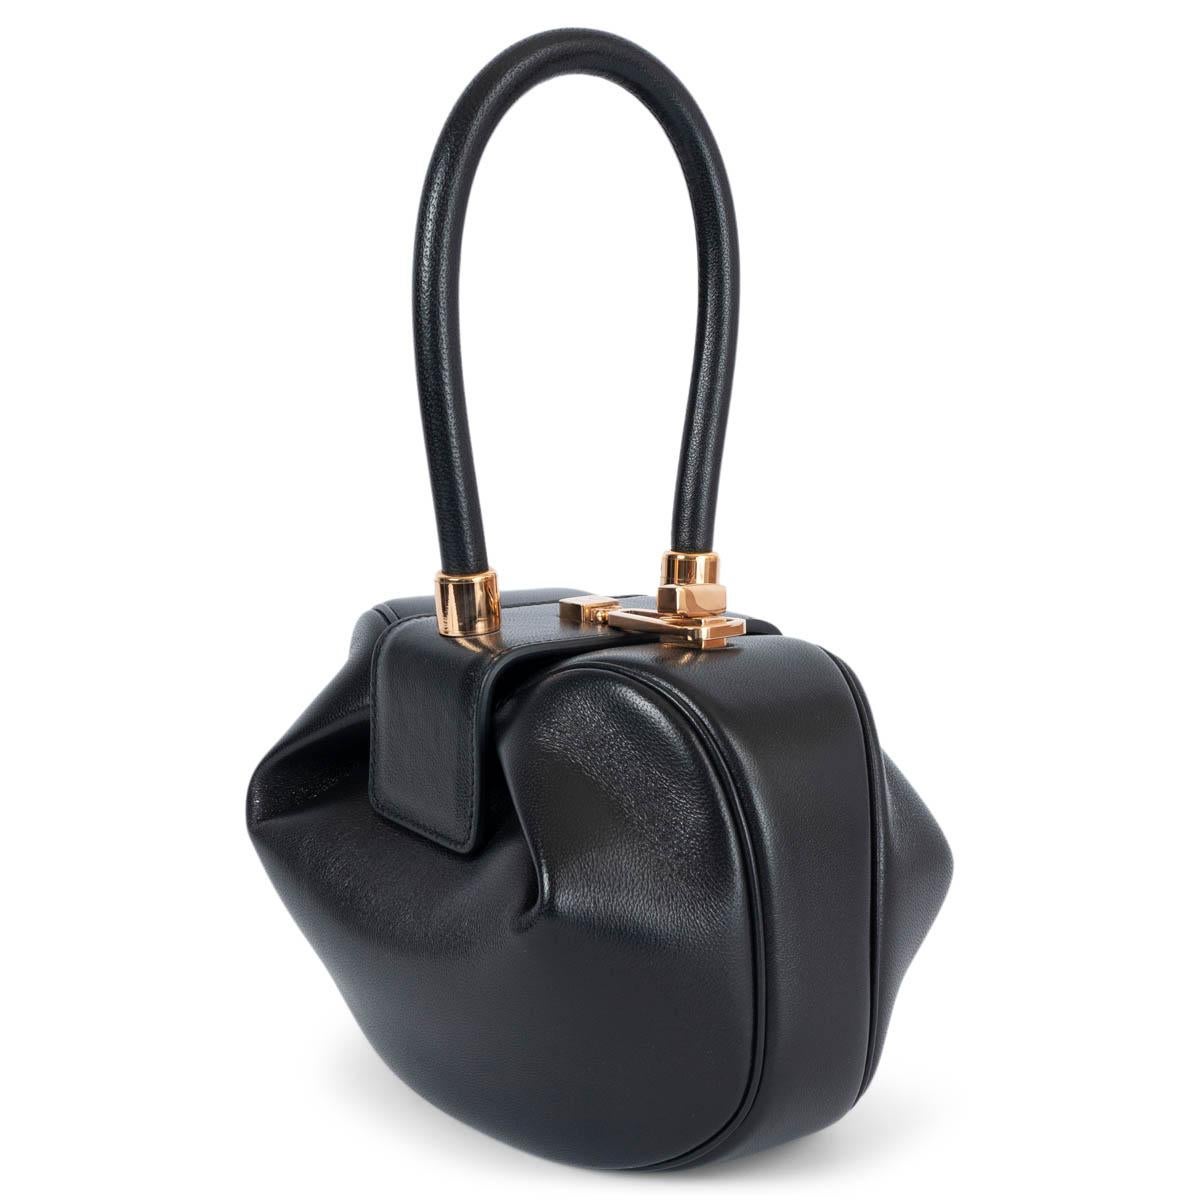 100% authentic Gabriela Hearst Demi Bag made of smooth lambskin leather and features a structured top handle with a distinctive round pouch that gently unfolds from a turn lock closure. Has been carried once and is in virtually new condition. LC